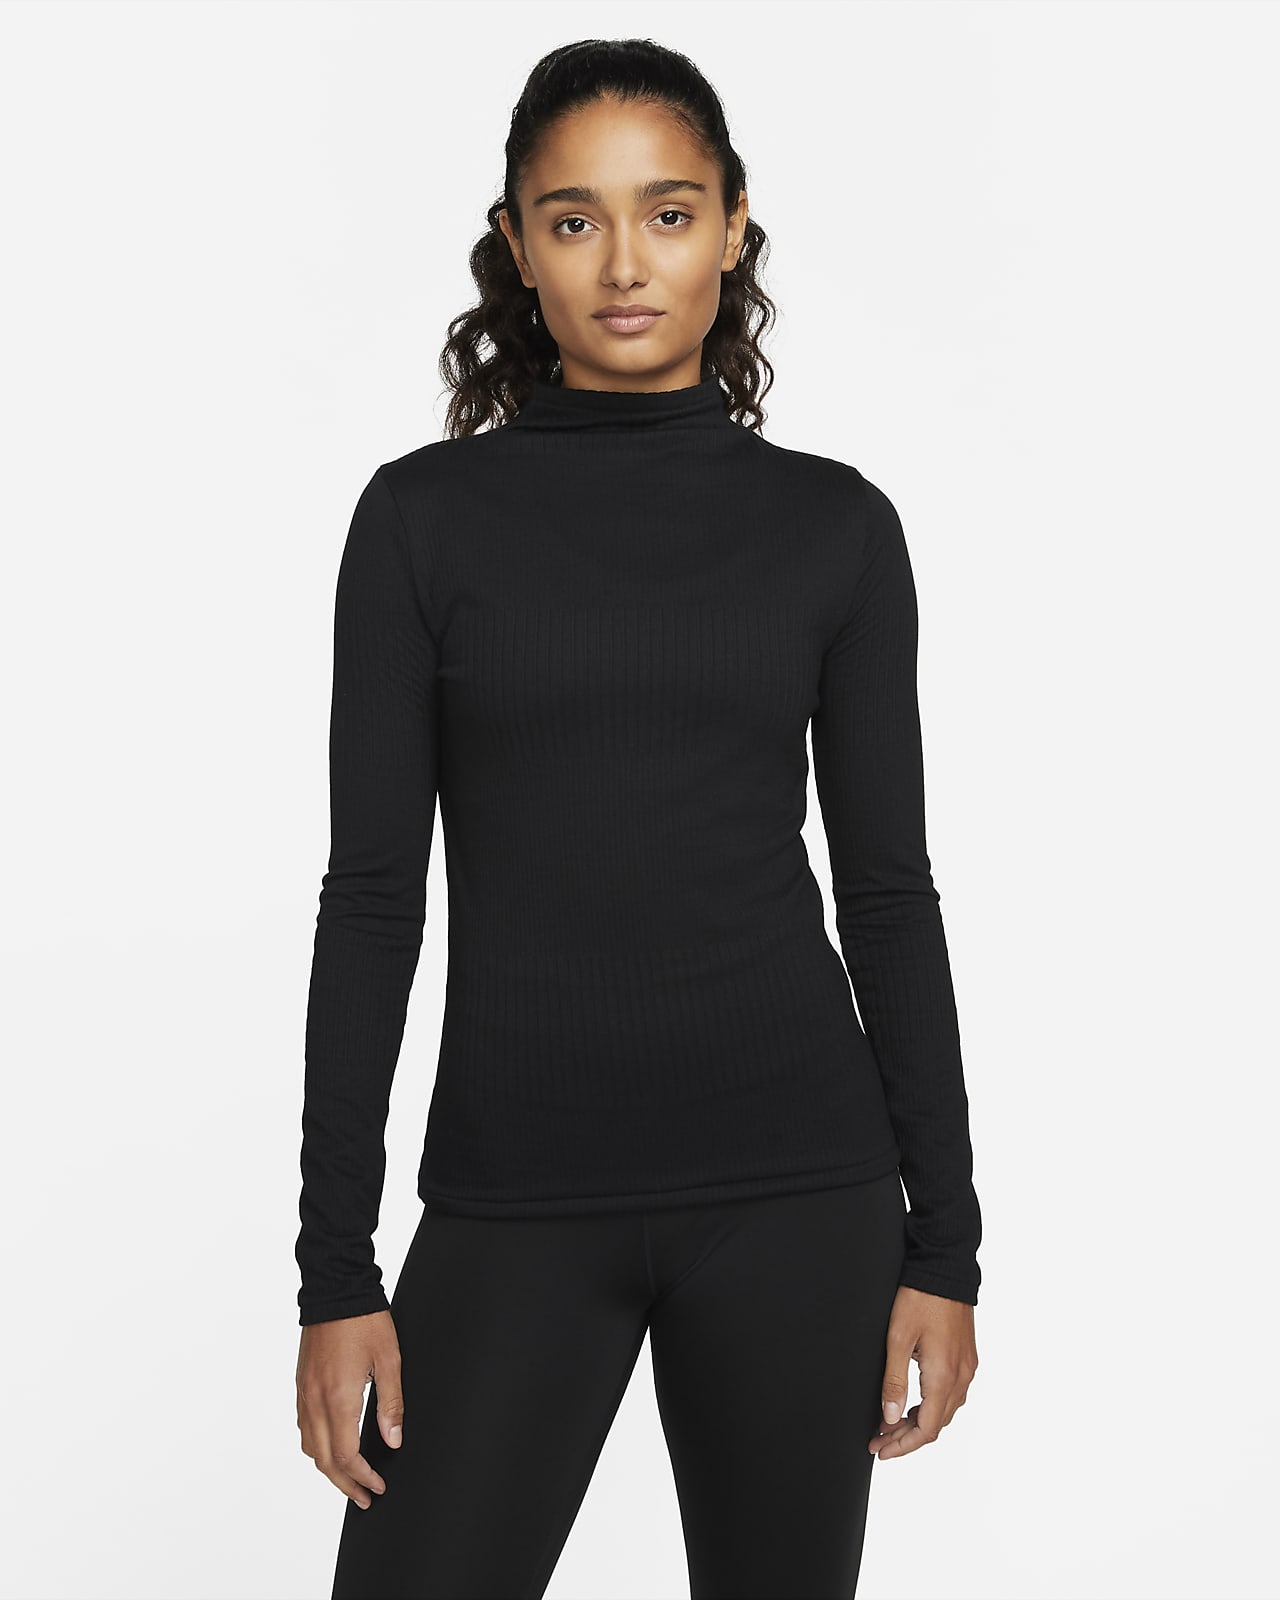 Nike Yoga Luxe Dri-FIT Women's Long-Sleeve Ribbed Top